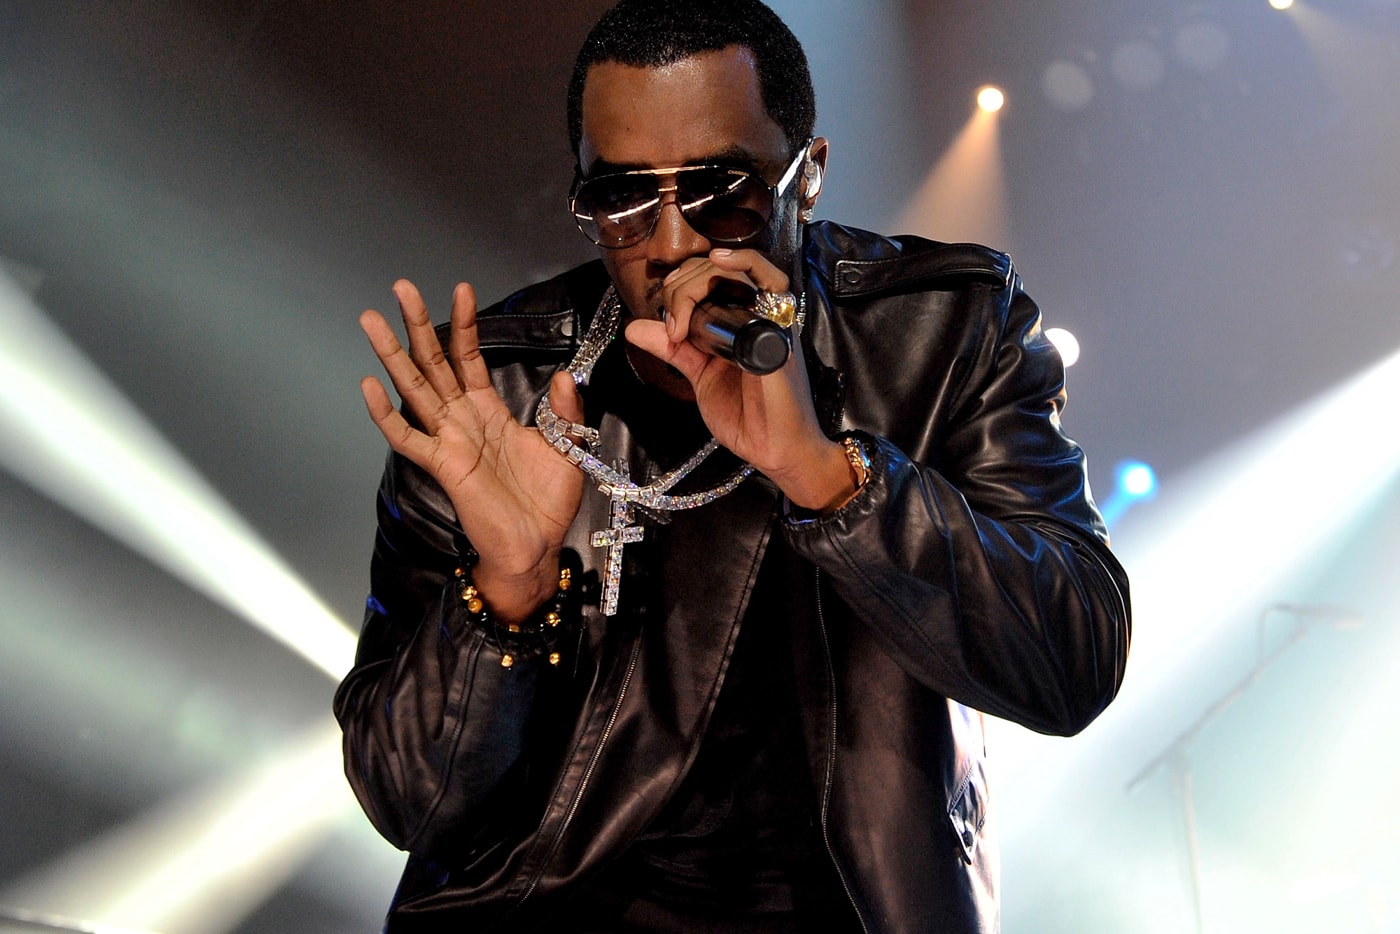 Puff Daddy, Lil Kim, Styles P and King Los, "Auction" Music Video